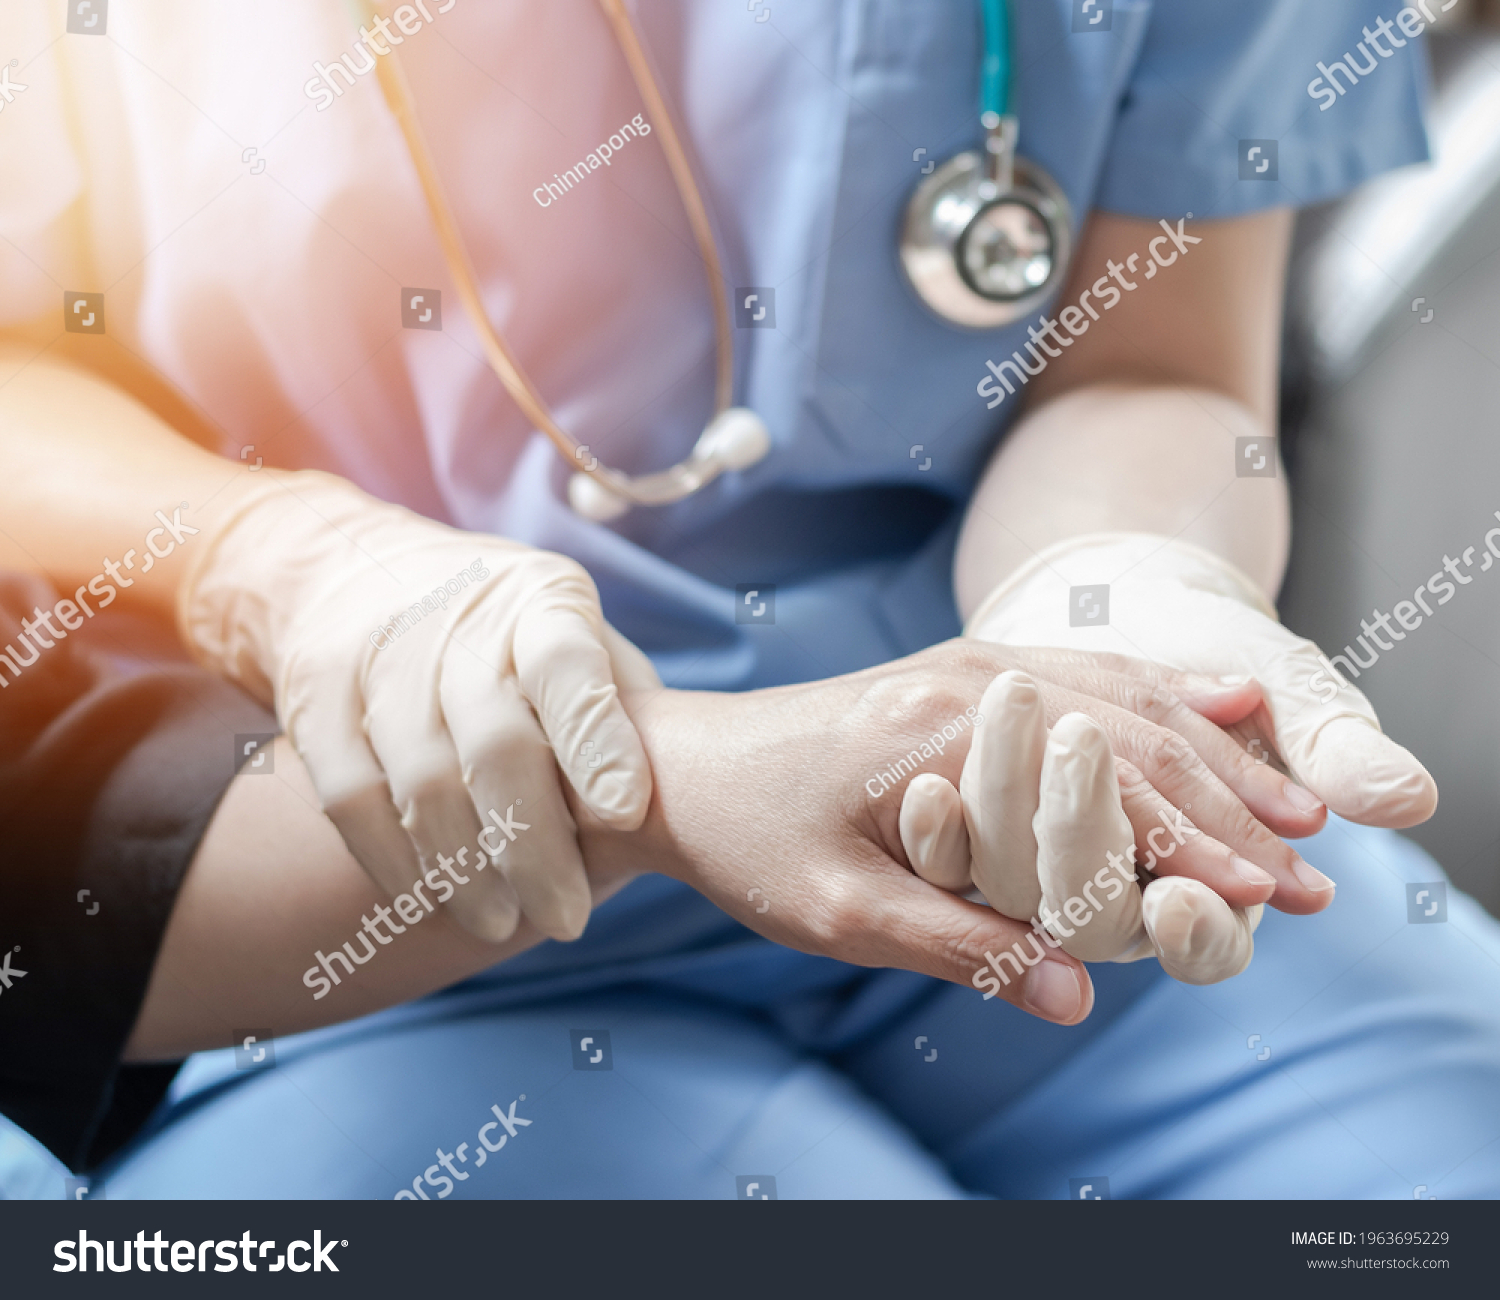 Surgeon, surgical doctor, anesthetist or anesthesiologist holding patient's hand for health care trust and support in professional ER surgical operation, medical anesthetic safety, healthcare concept #1963695229